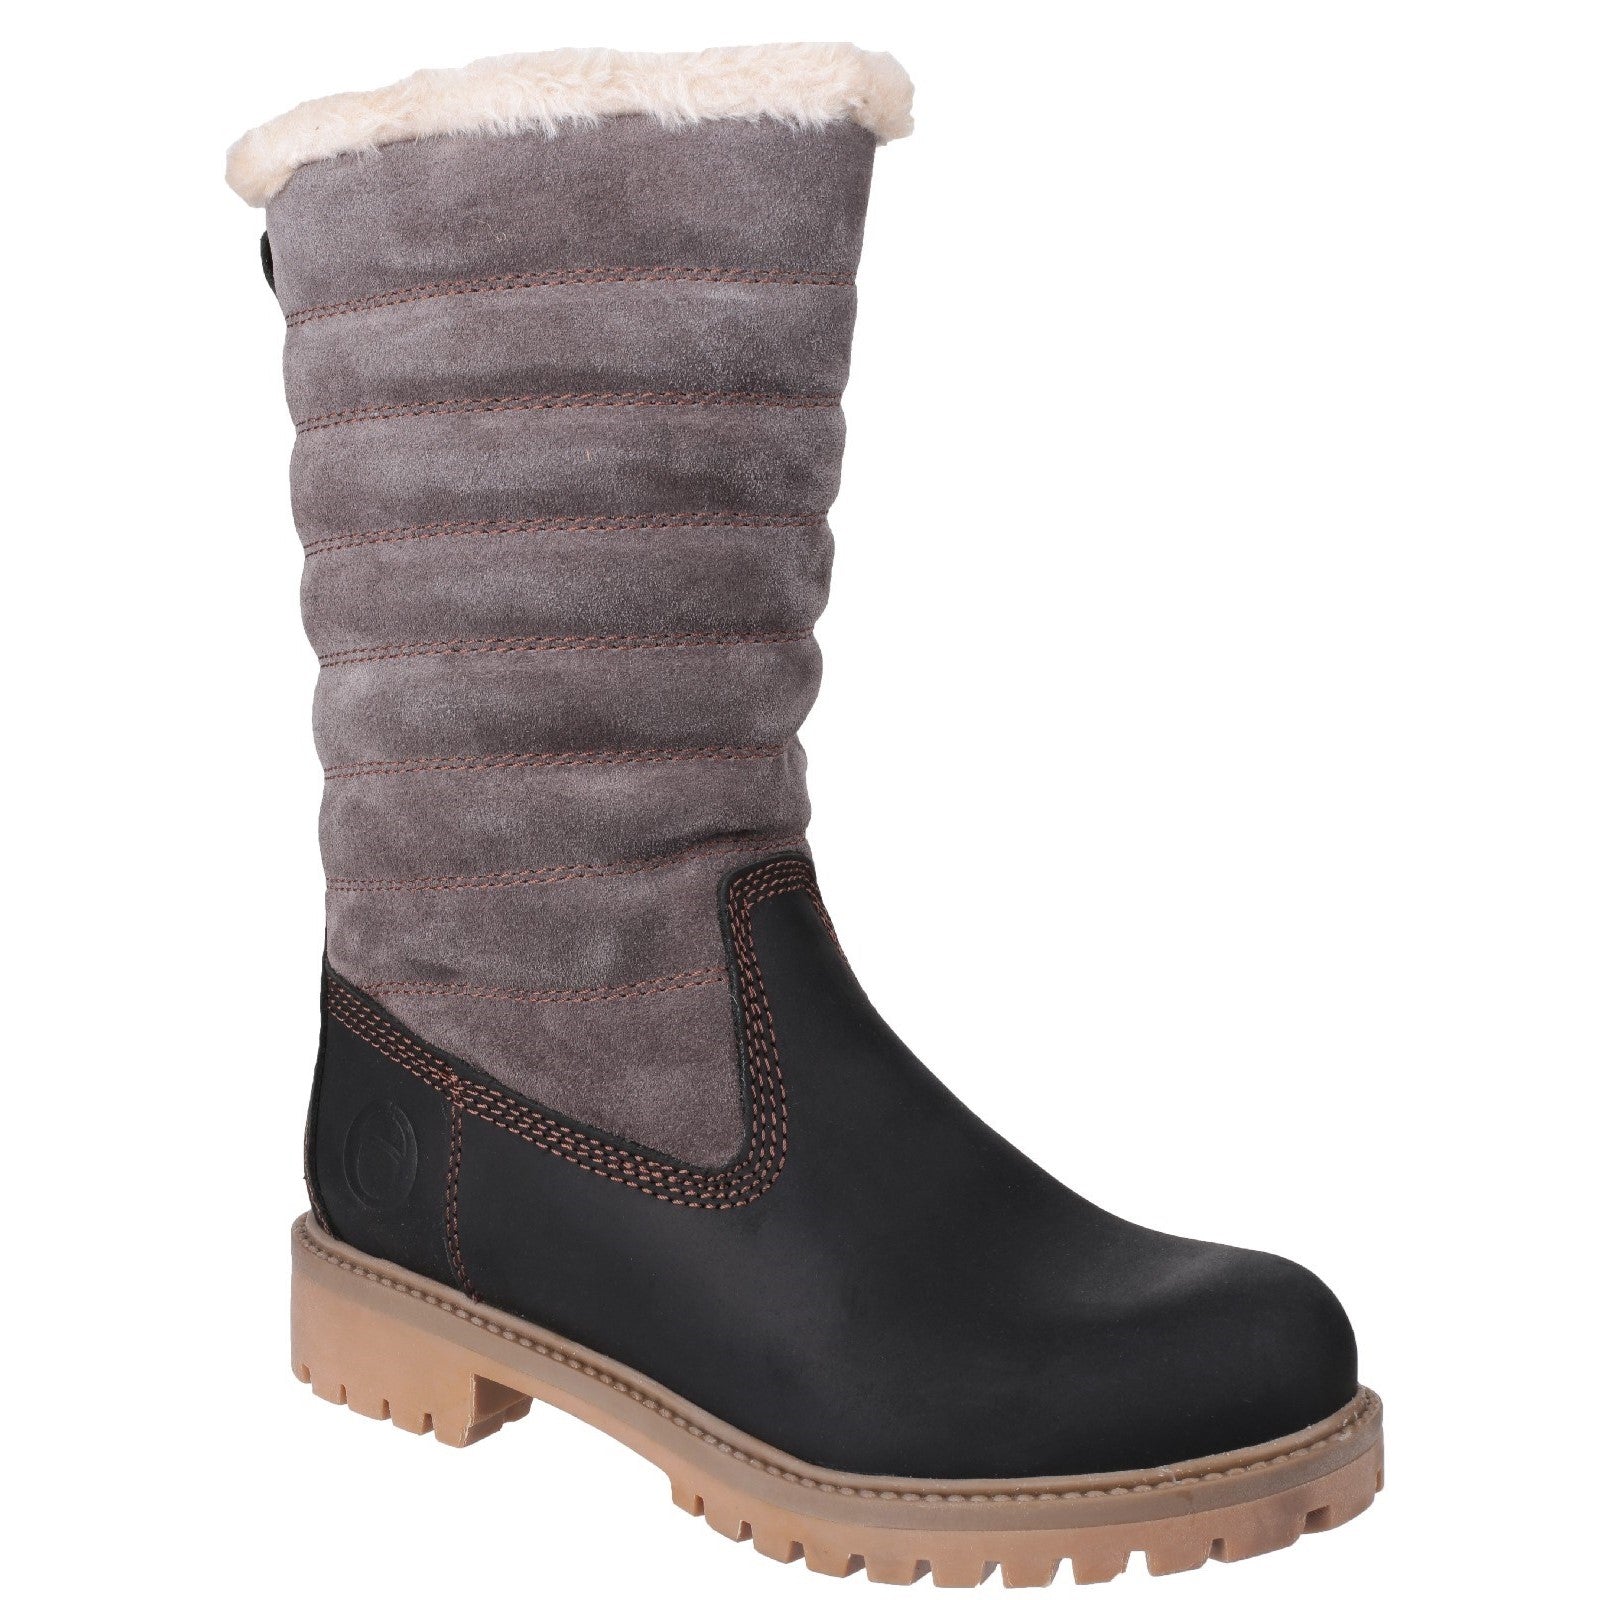 Cotswold Ripple Zip Up Boot